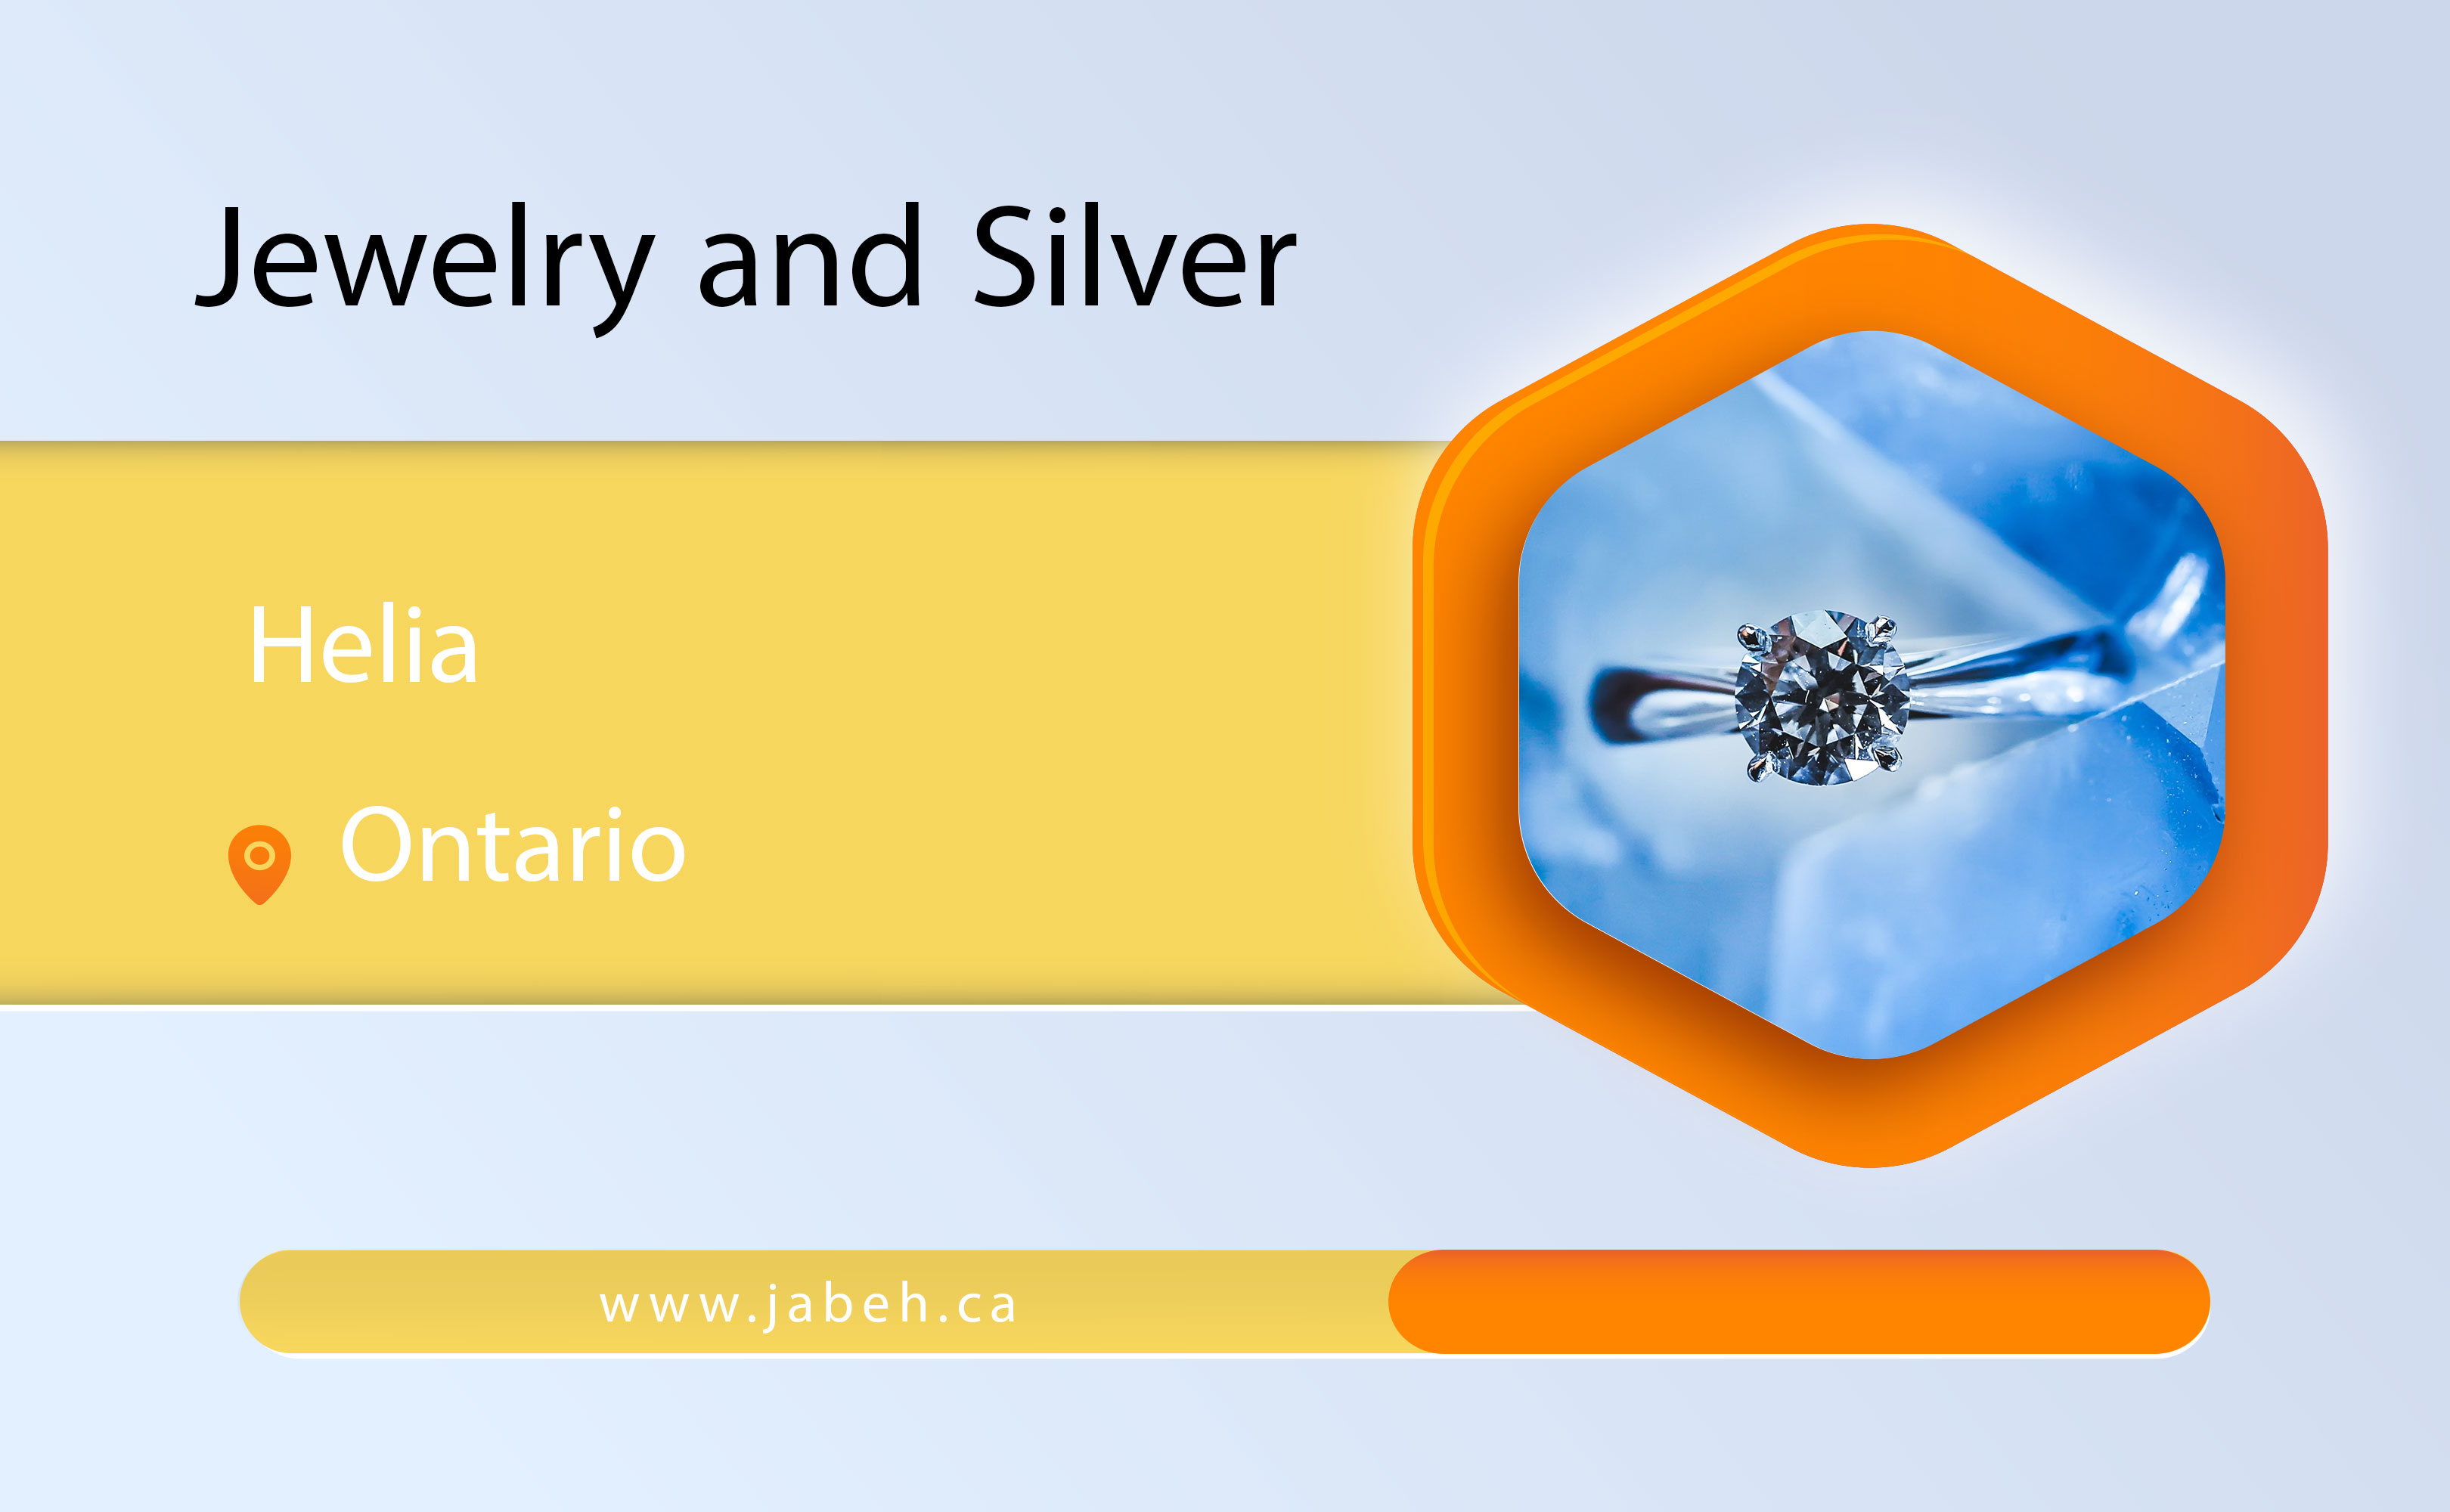 Helia jewelry and silver in Ontario